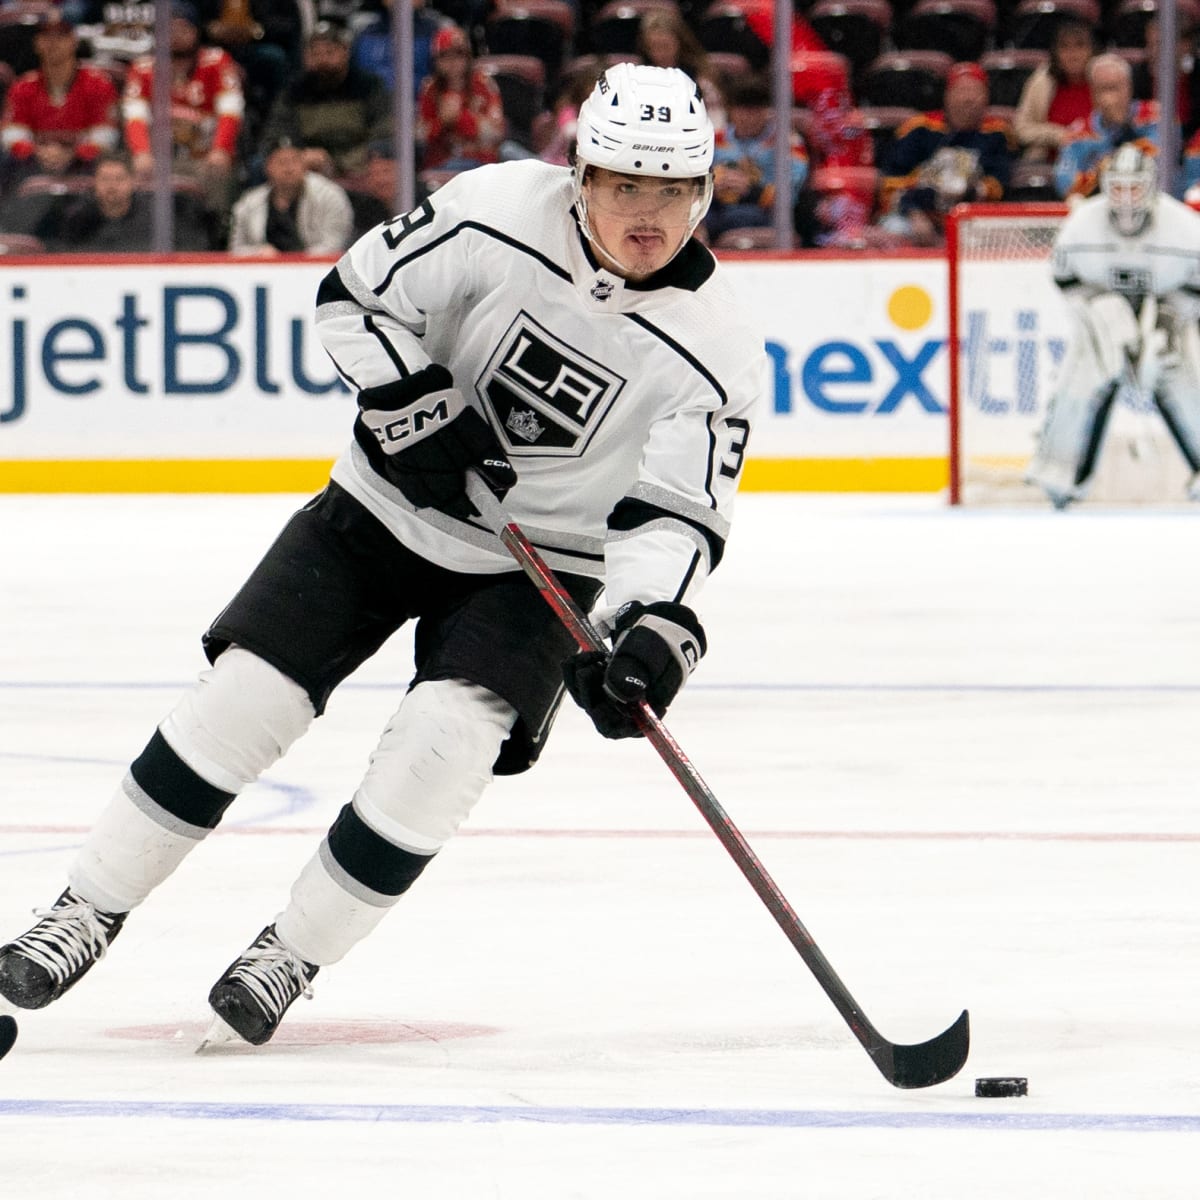 2022 NHL draft prospects reflect Los Angeles Kings' new direction